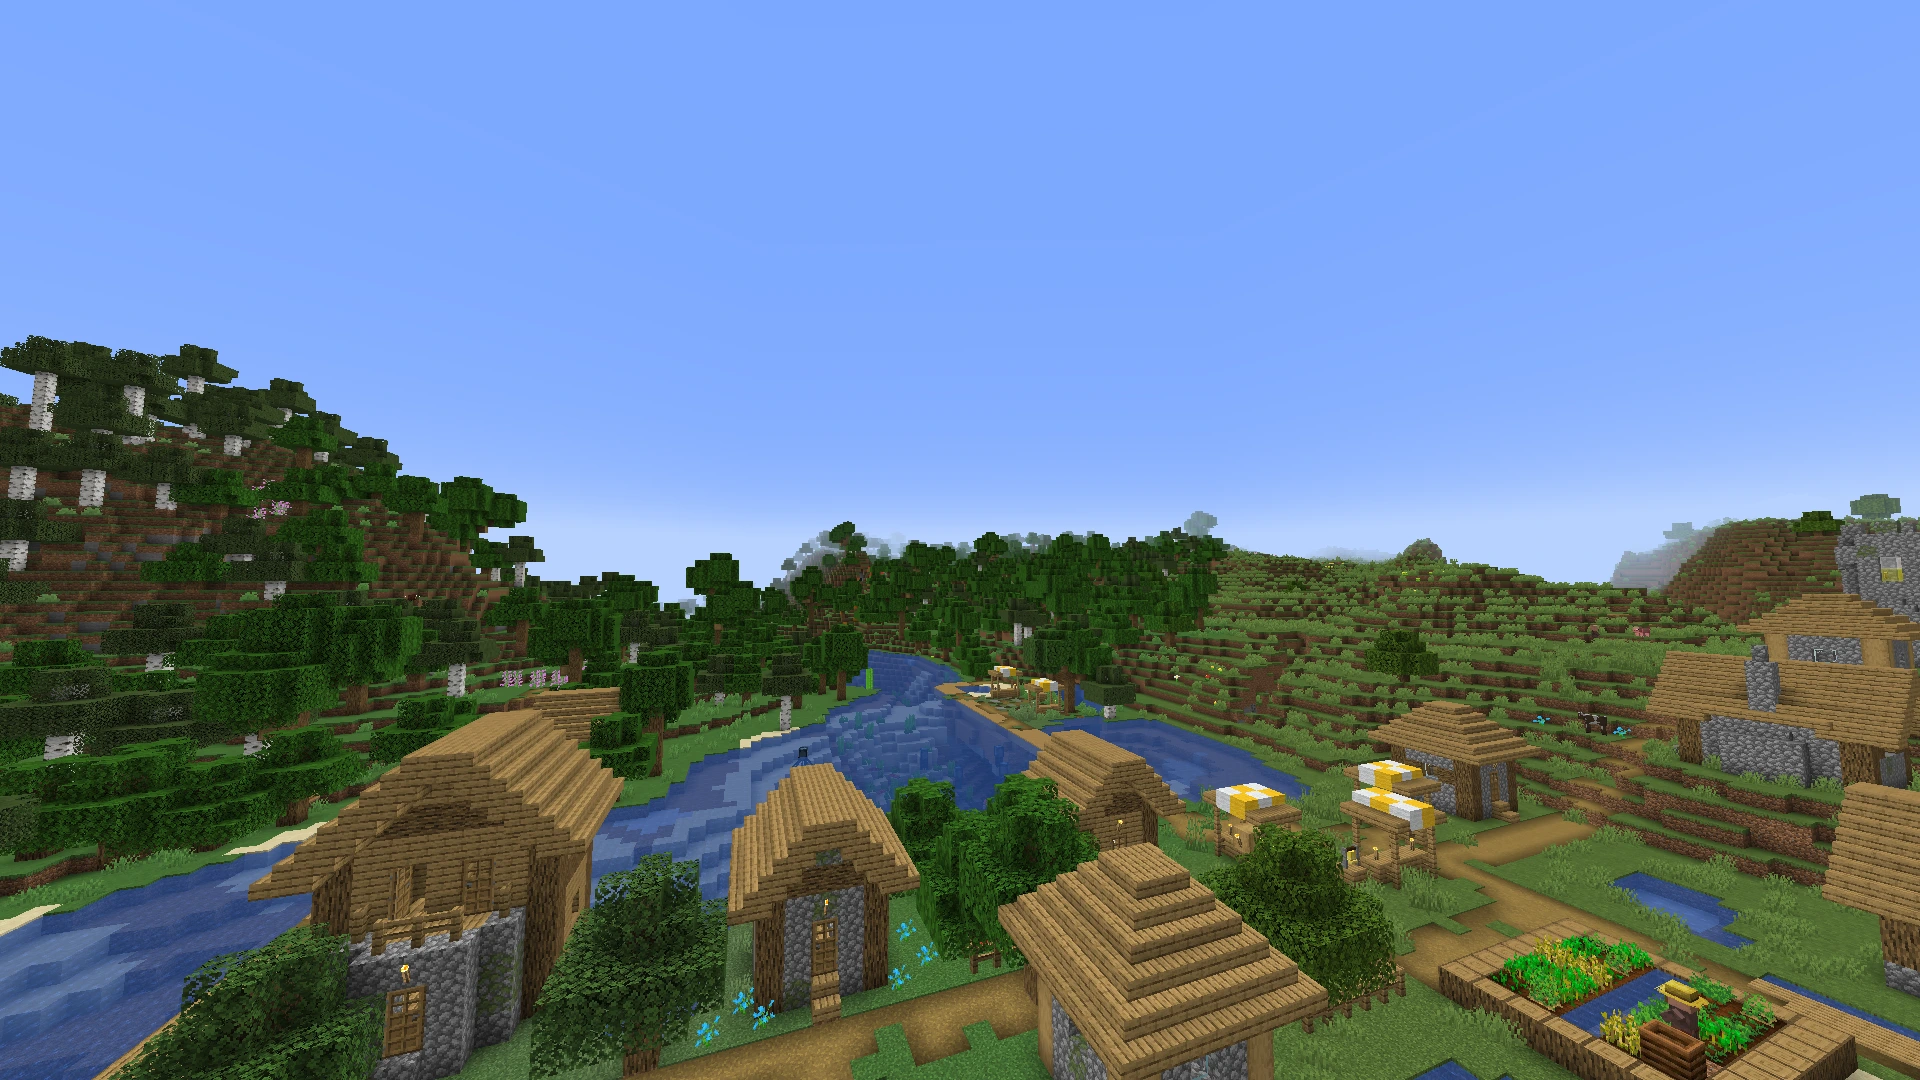 Bird's-eye of a Minecraft village with a lake and a forest in the background